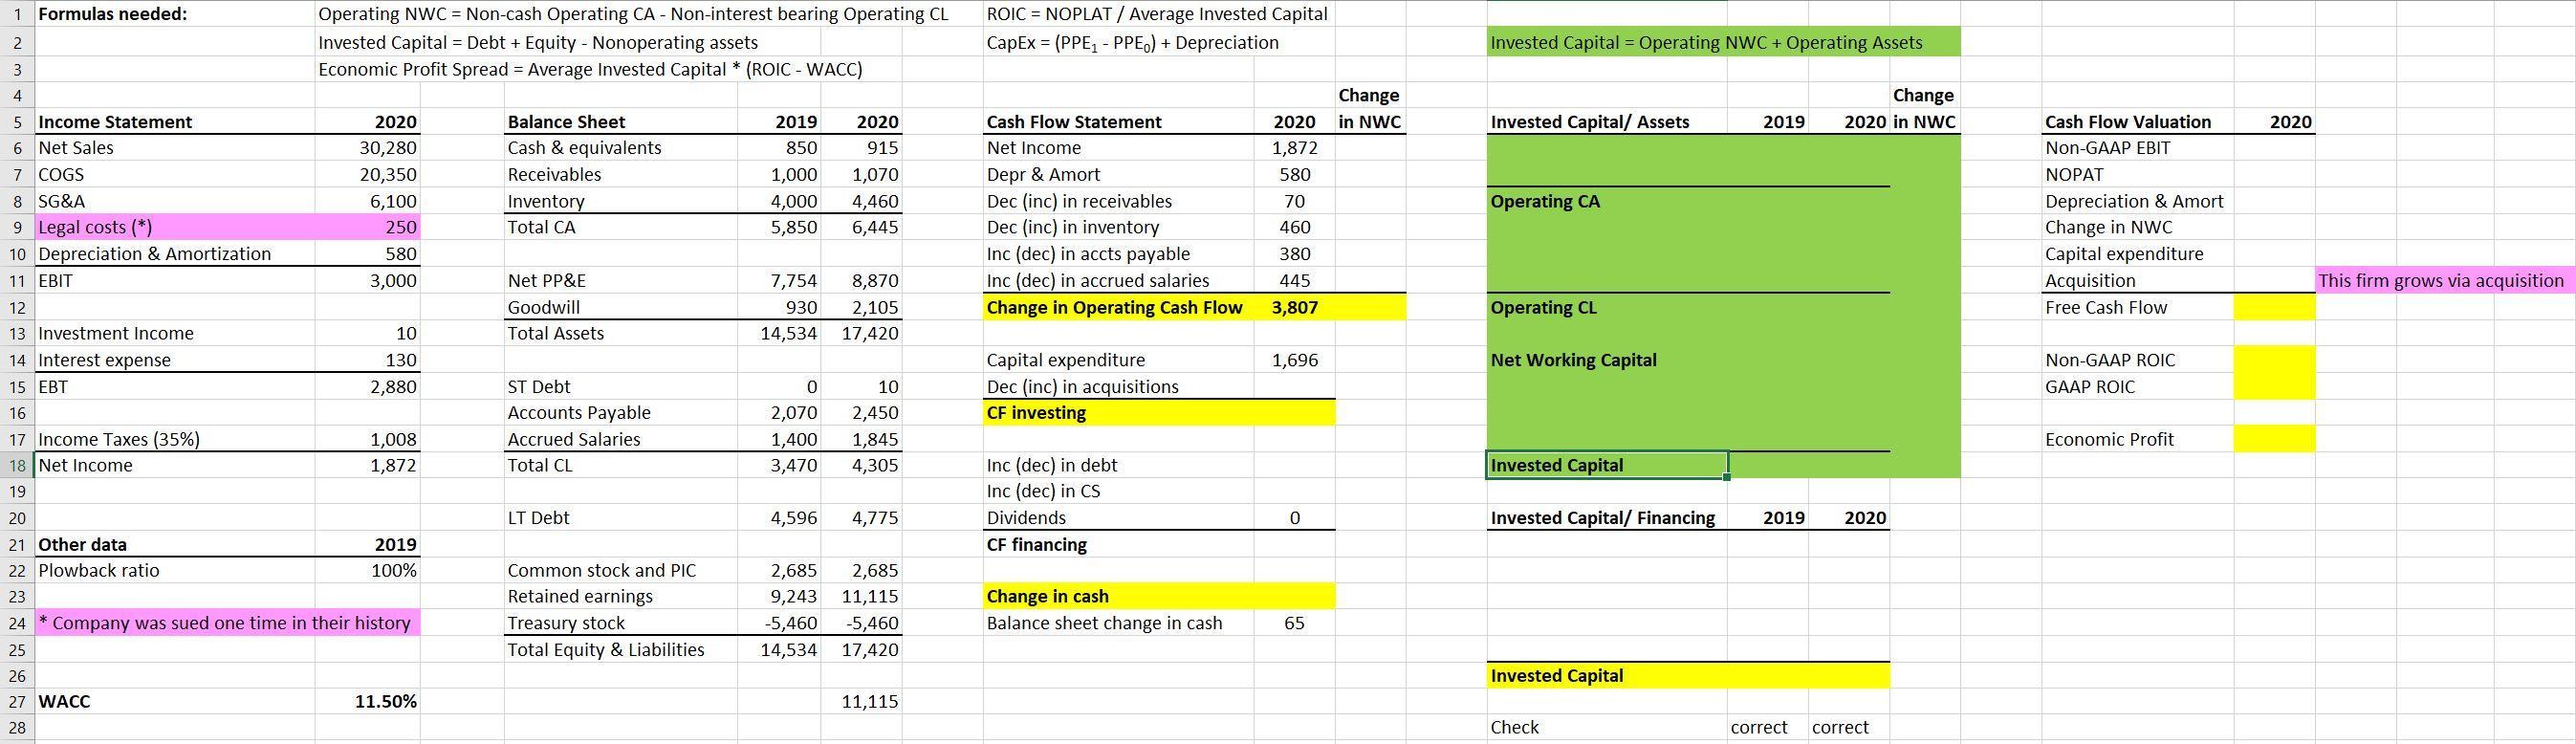 1 Formulas needed: Operating NWC = Non-cash Operating CA - Non-interest bearing Operating CL Invested Capital = Debt + Equity